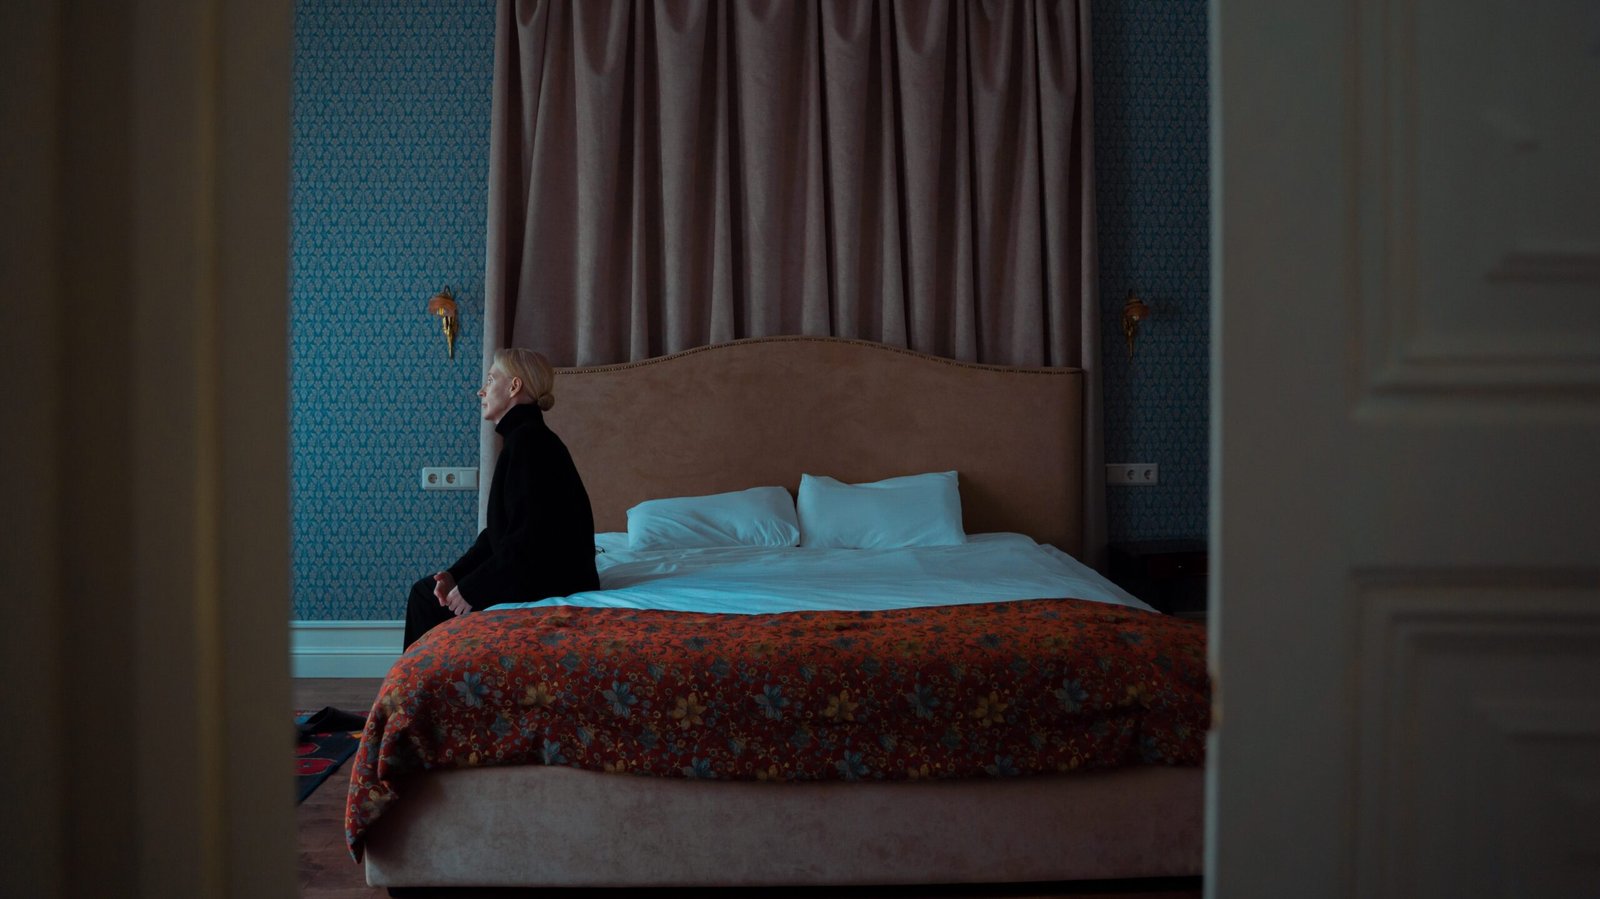 A depressing scene of a woman sitting on her bed.